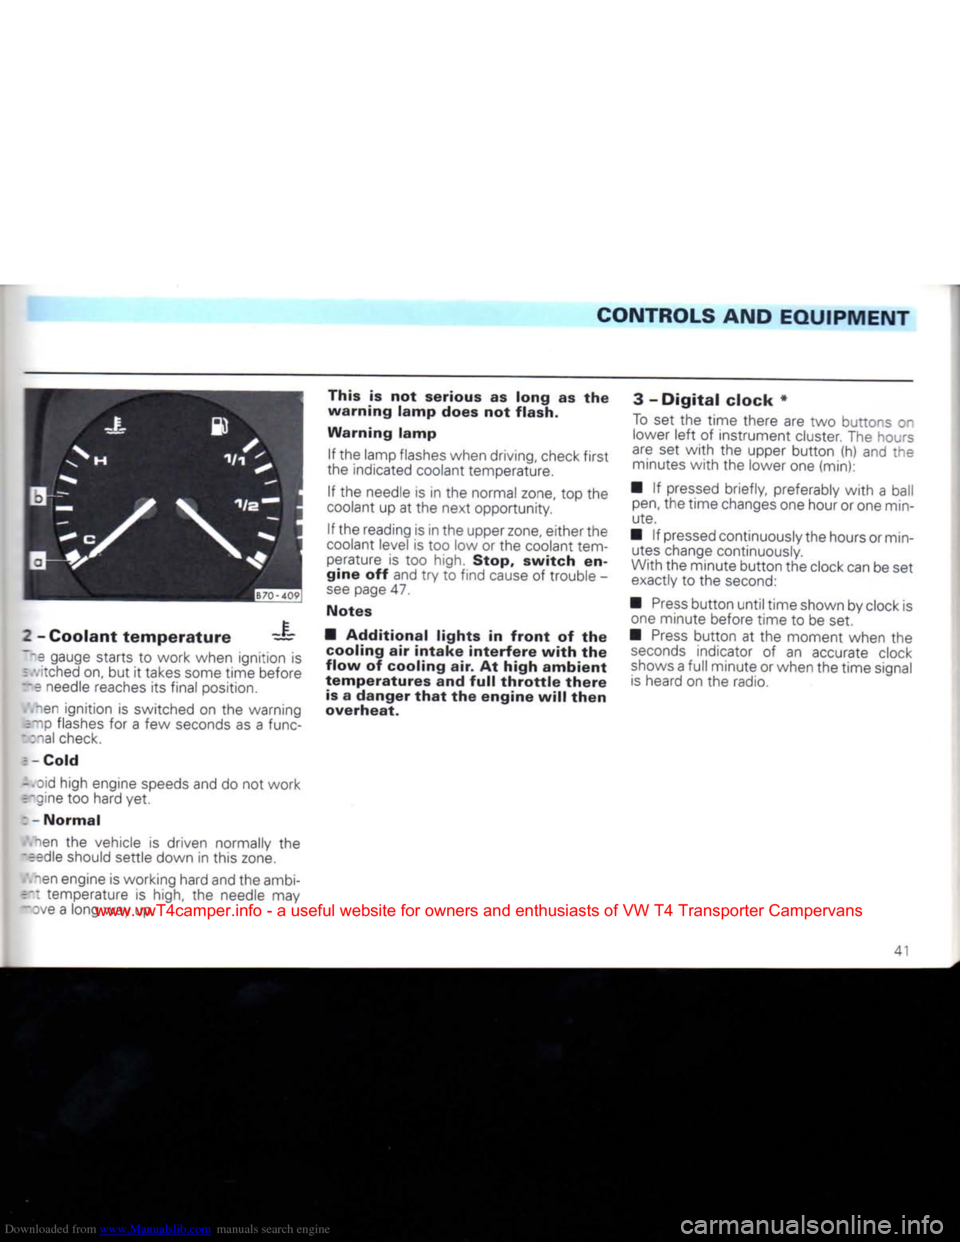 VOLKSWAGEN CARAVELLE 1992 T4 / 4.G Service Manual Downloaded from www.Manualslib.com manuals search engine 
CONTROLS AND EQUIPMENT 

2
 -
 Coolant temperature
 — 
~~s
 gauge starts
 to
 work
 when ignition
 is 
 =
 .vitched on,
 but it
 takes some 